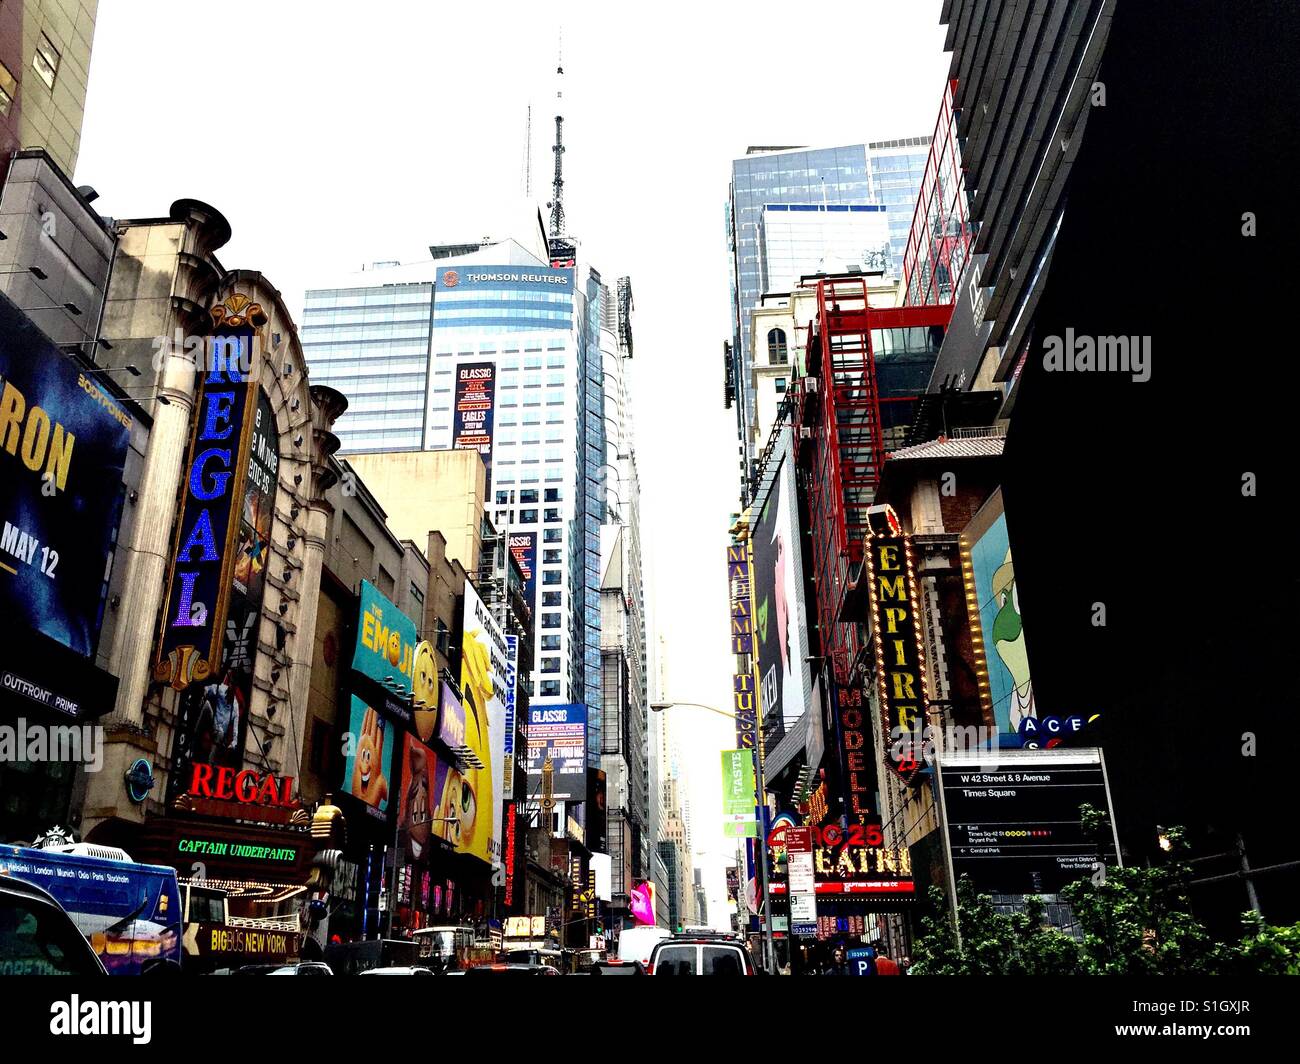 Time Square, 42nd Street, flowing east, black sign identifies location, Crossroads of the World, Theaters, Corporations, Office buildings,Landmarks,Subways, traffic, tour buses, yes even a green bush Stock Photo